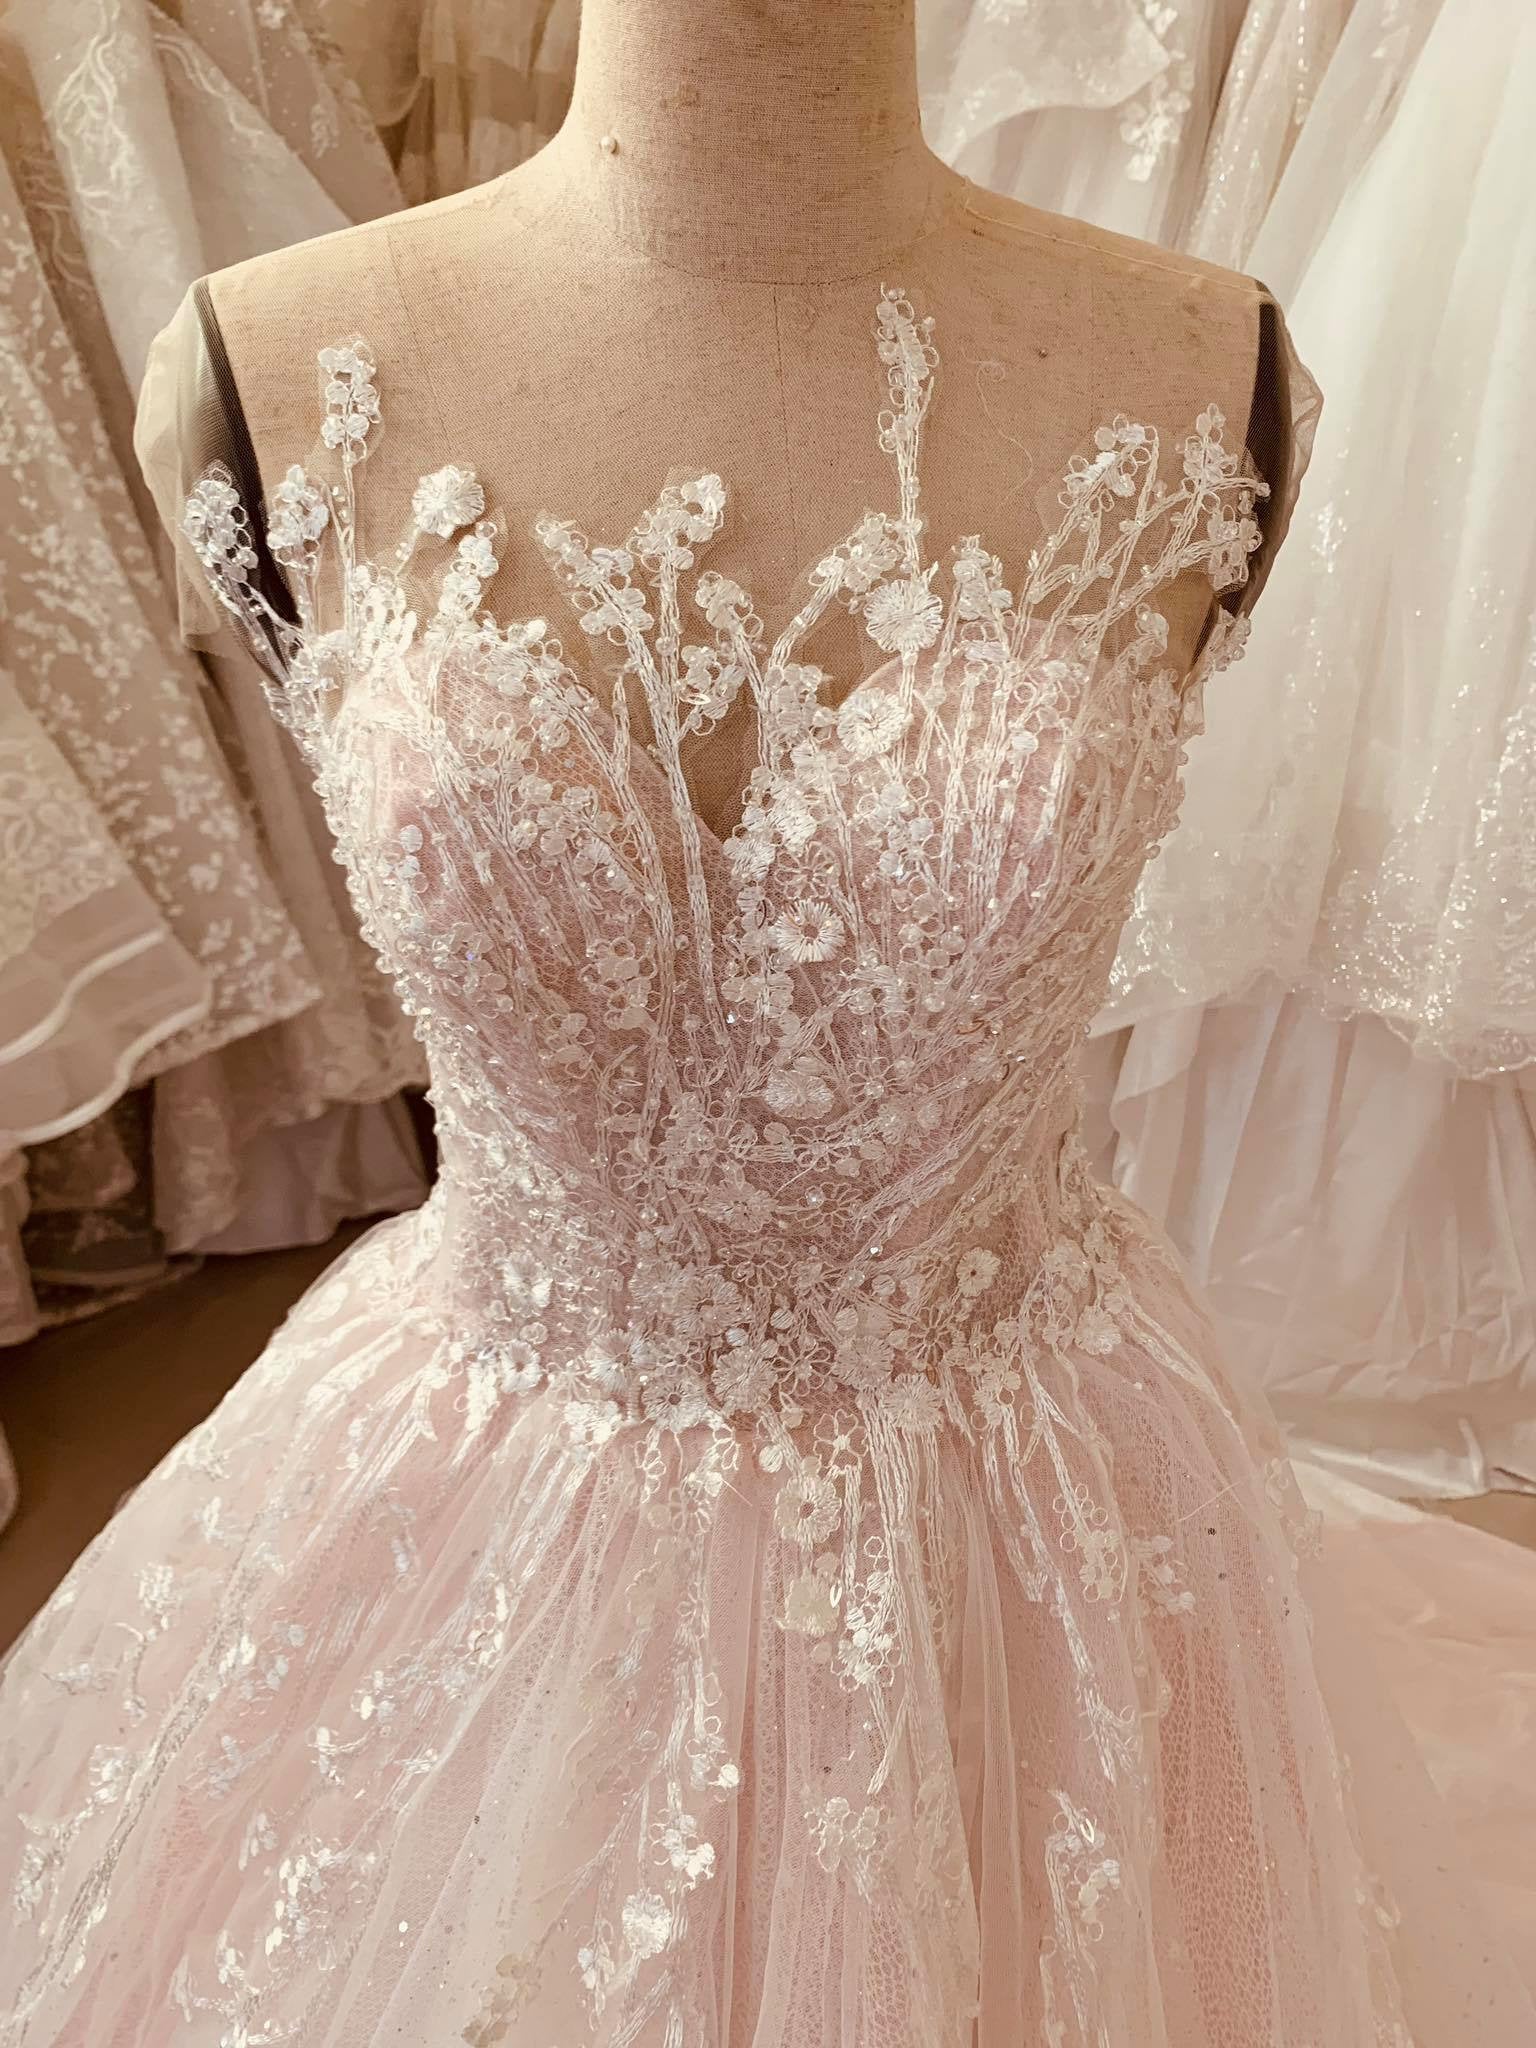 Pastel light pink sleeveless lace applique ball gown